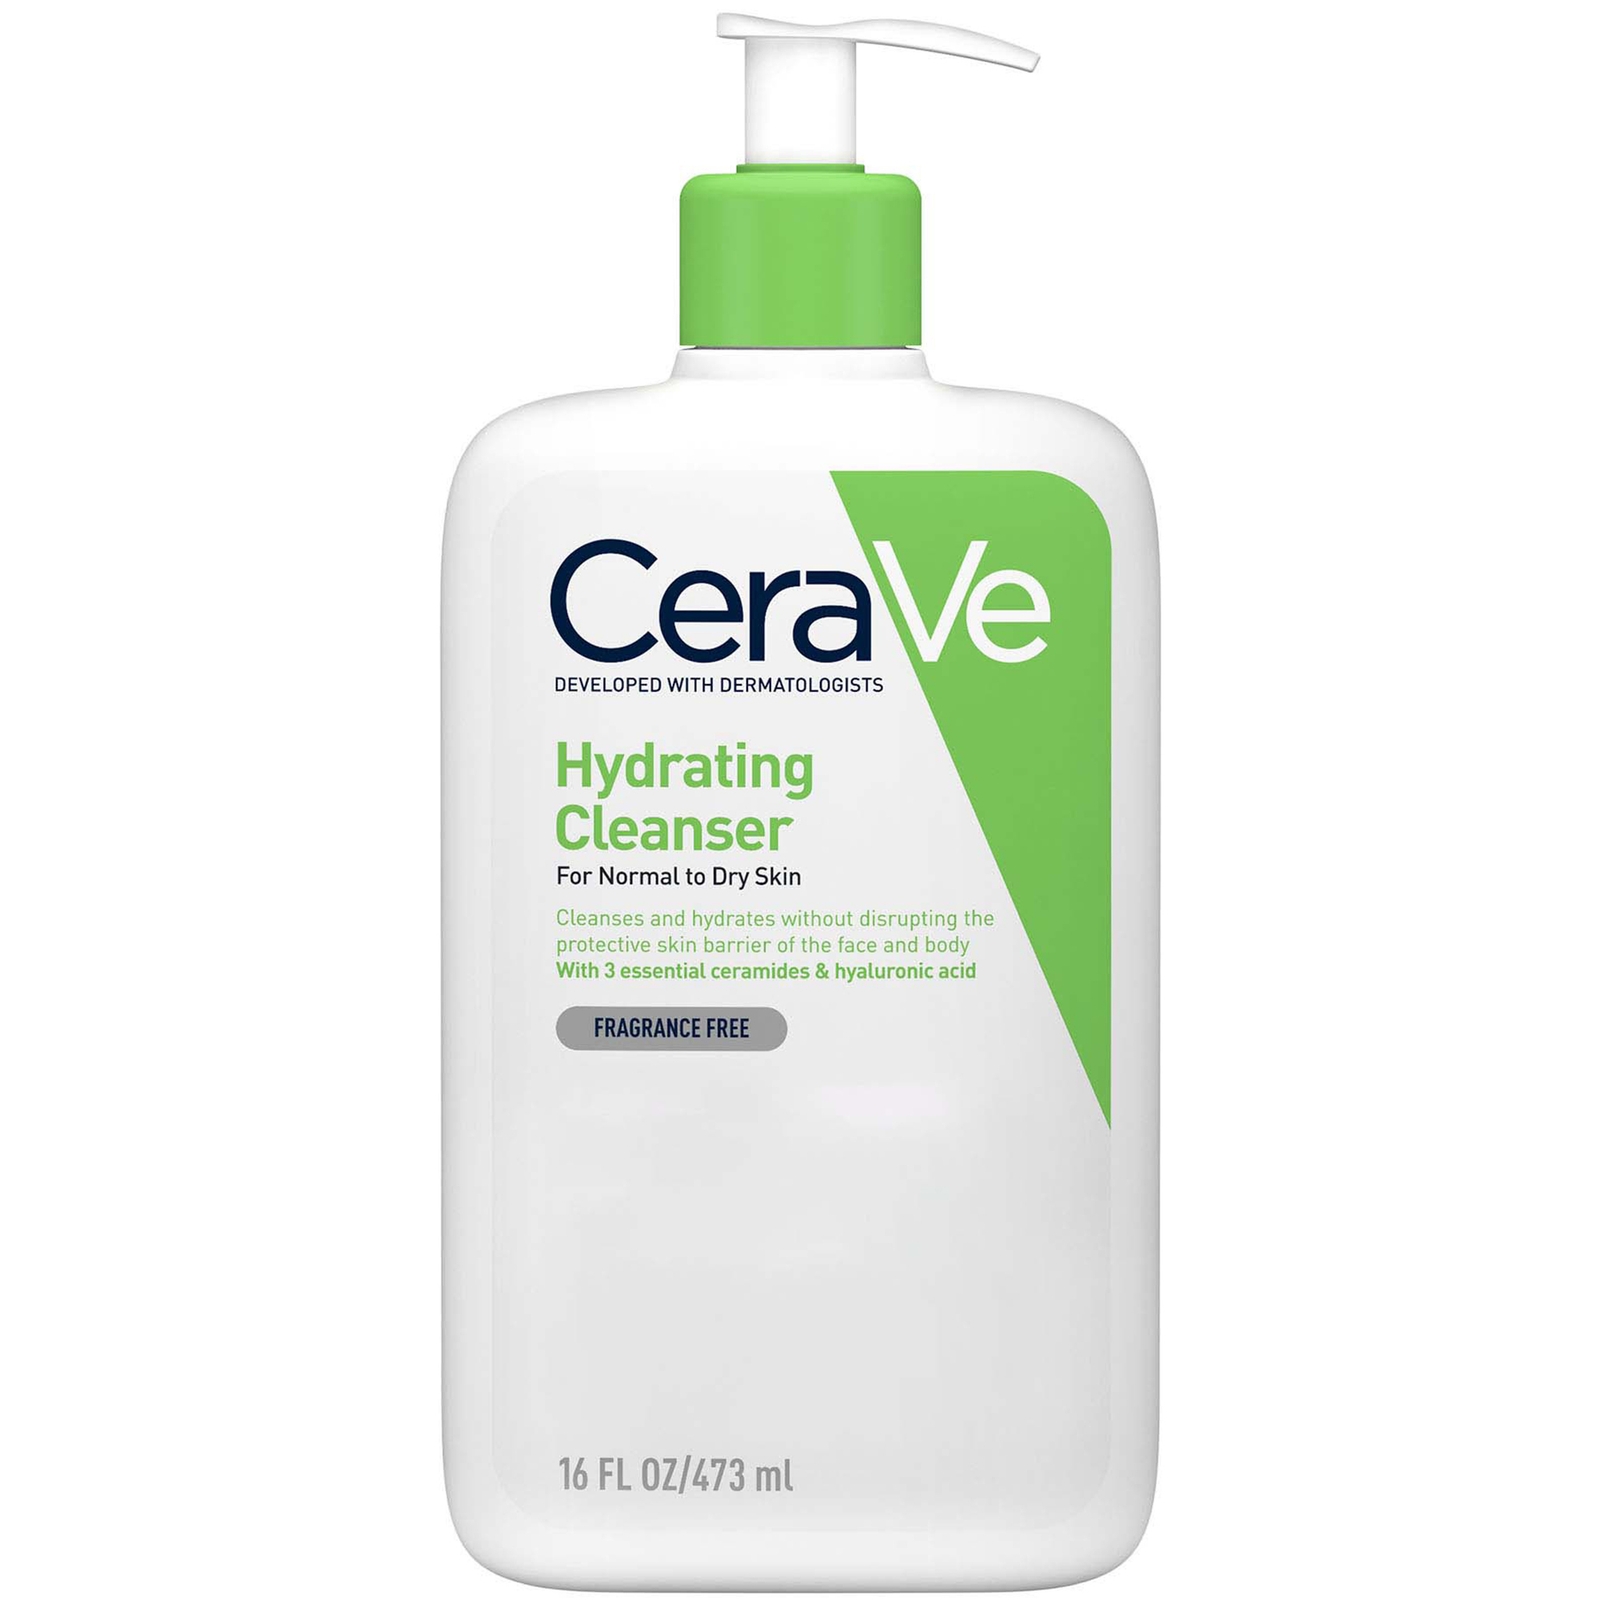 Photos - Facial / Body Cleansing Product CeraVe Hydrating Cleanser 473ml 